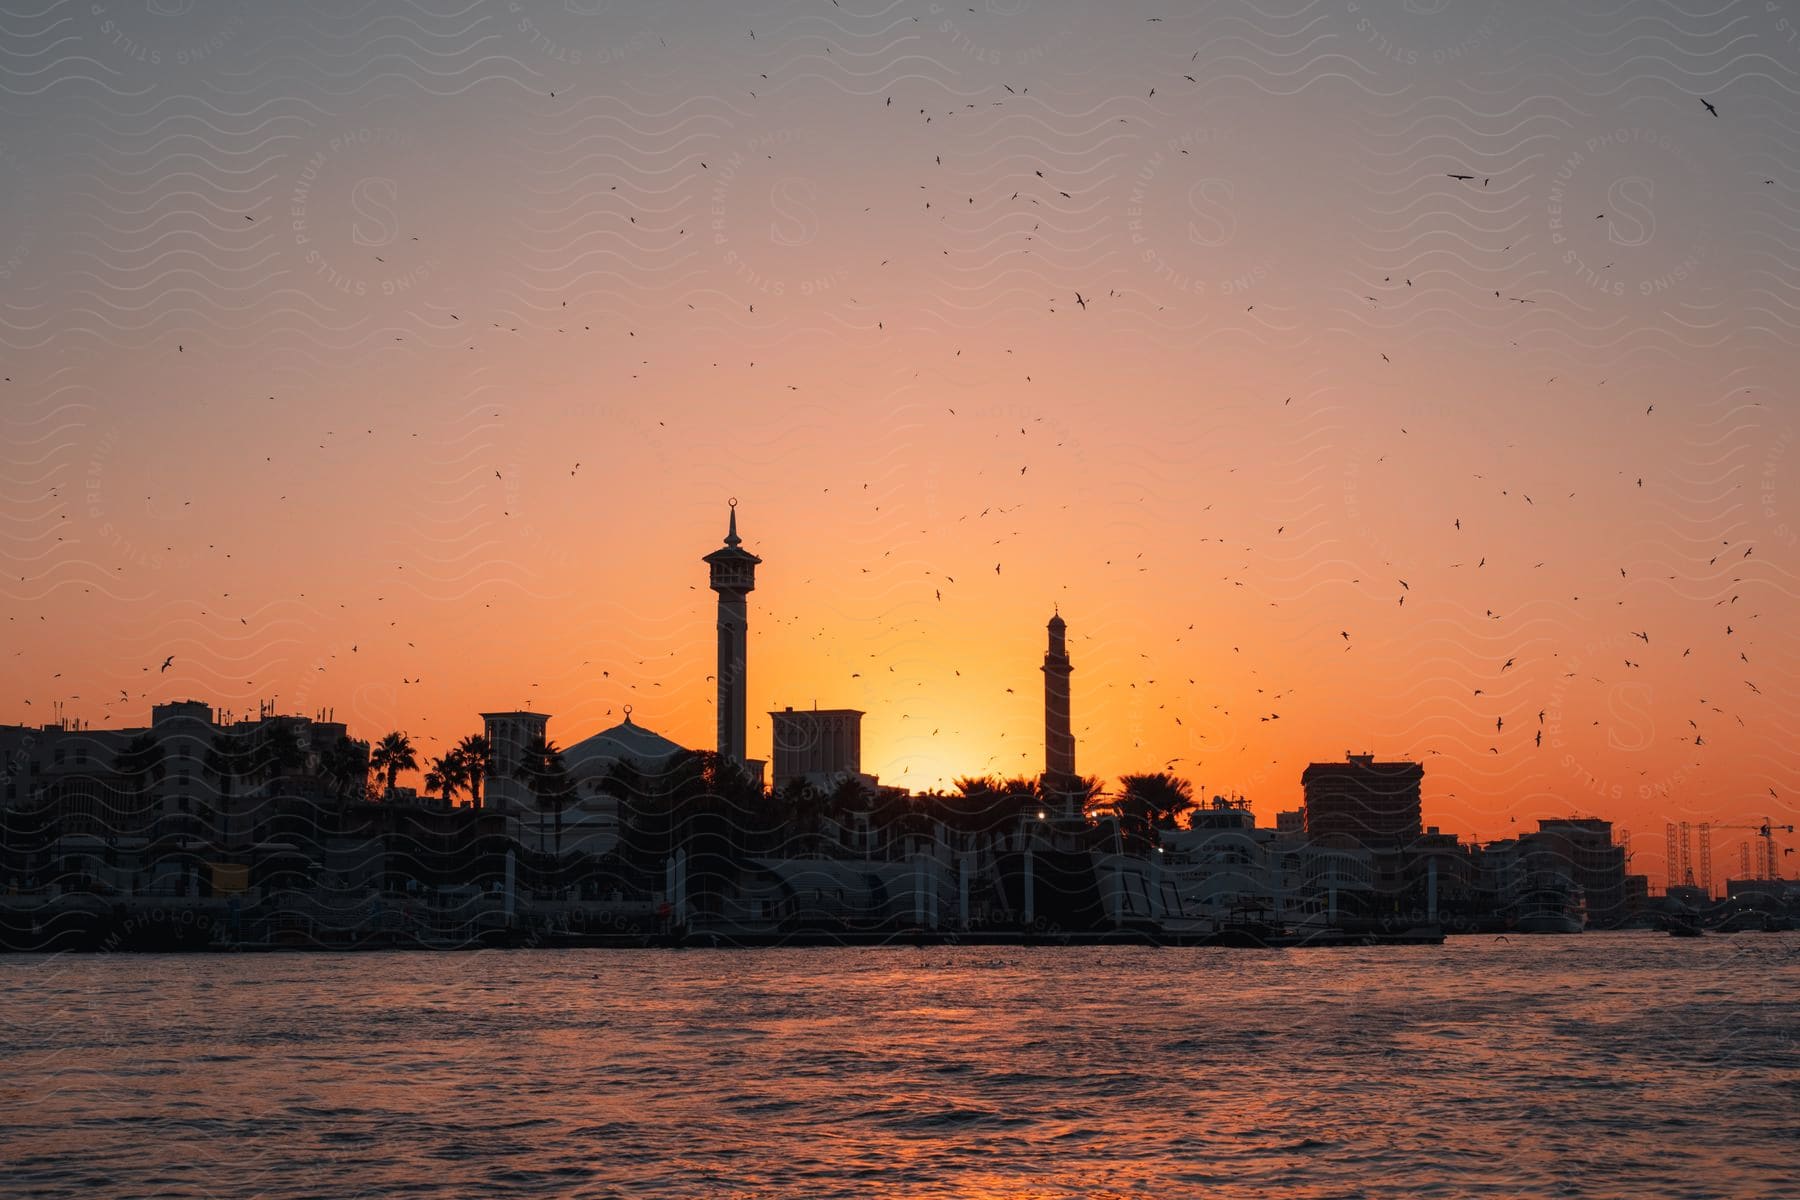 This image is of a beautiful sunset over a city, with birds flying overhead.